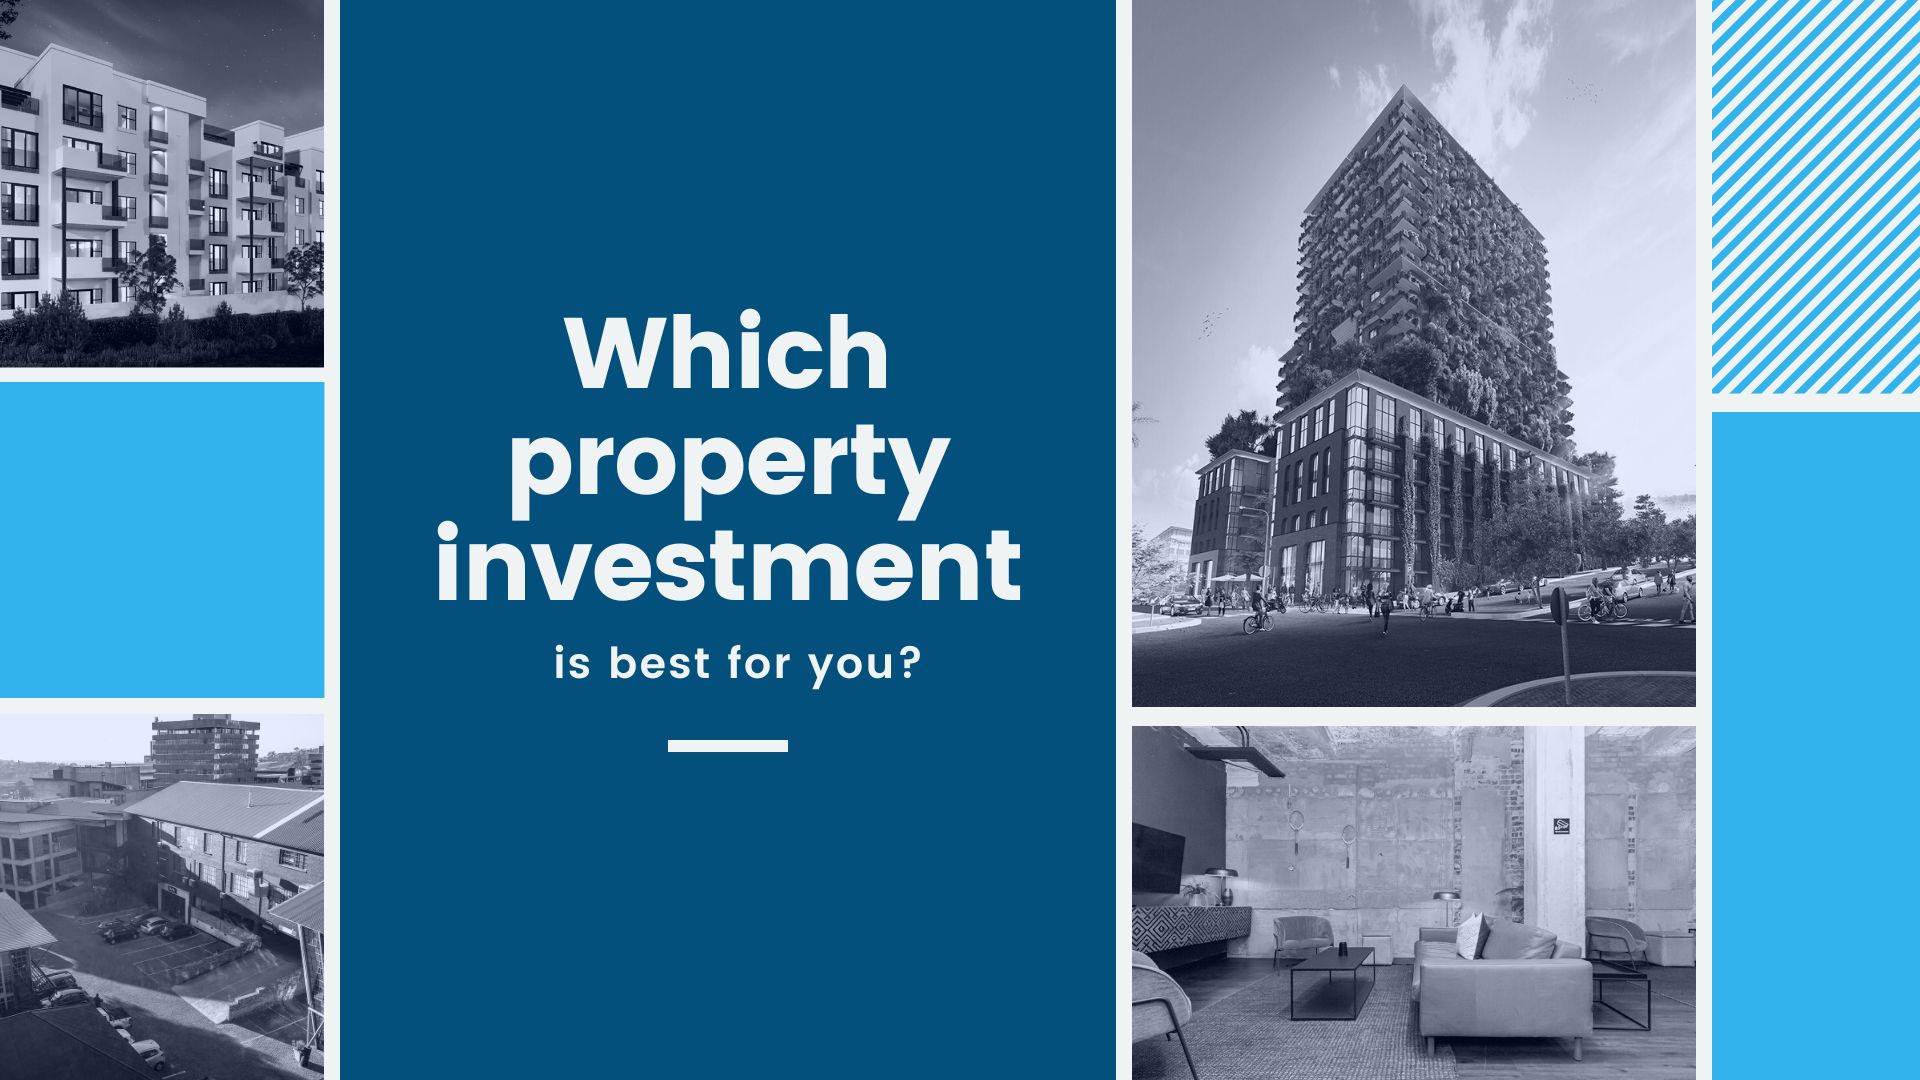 Which property investment is best for you